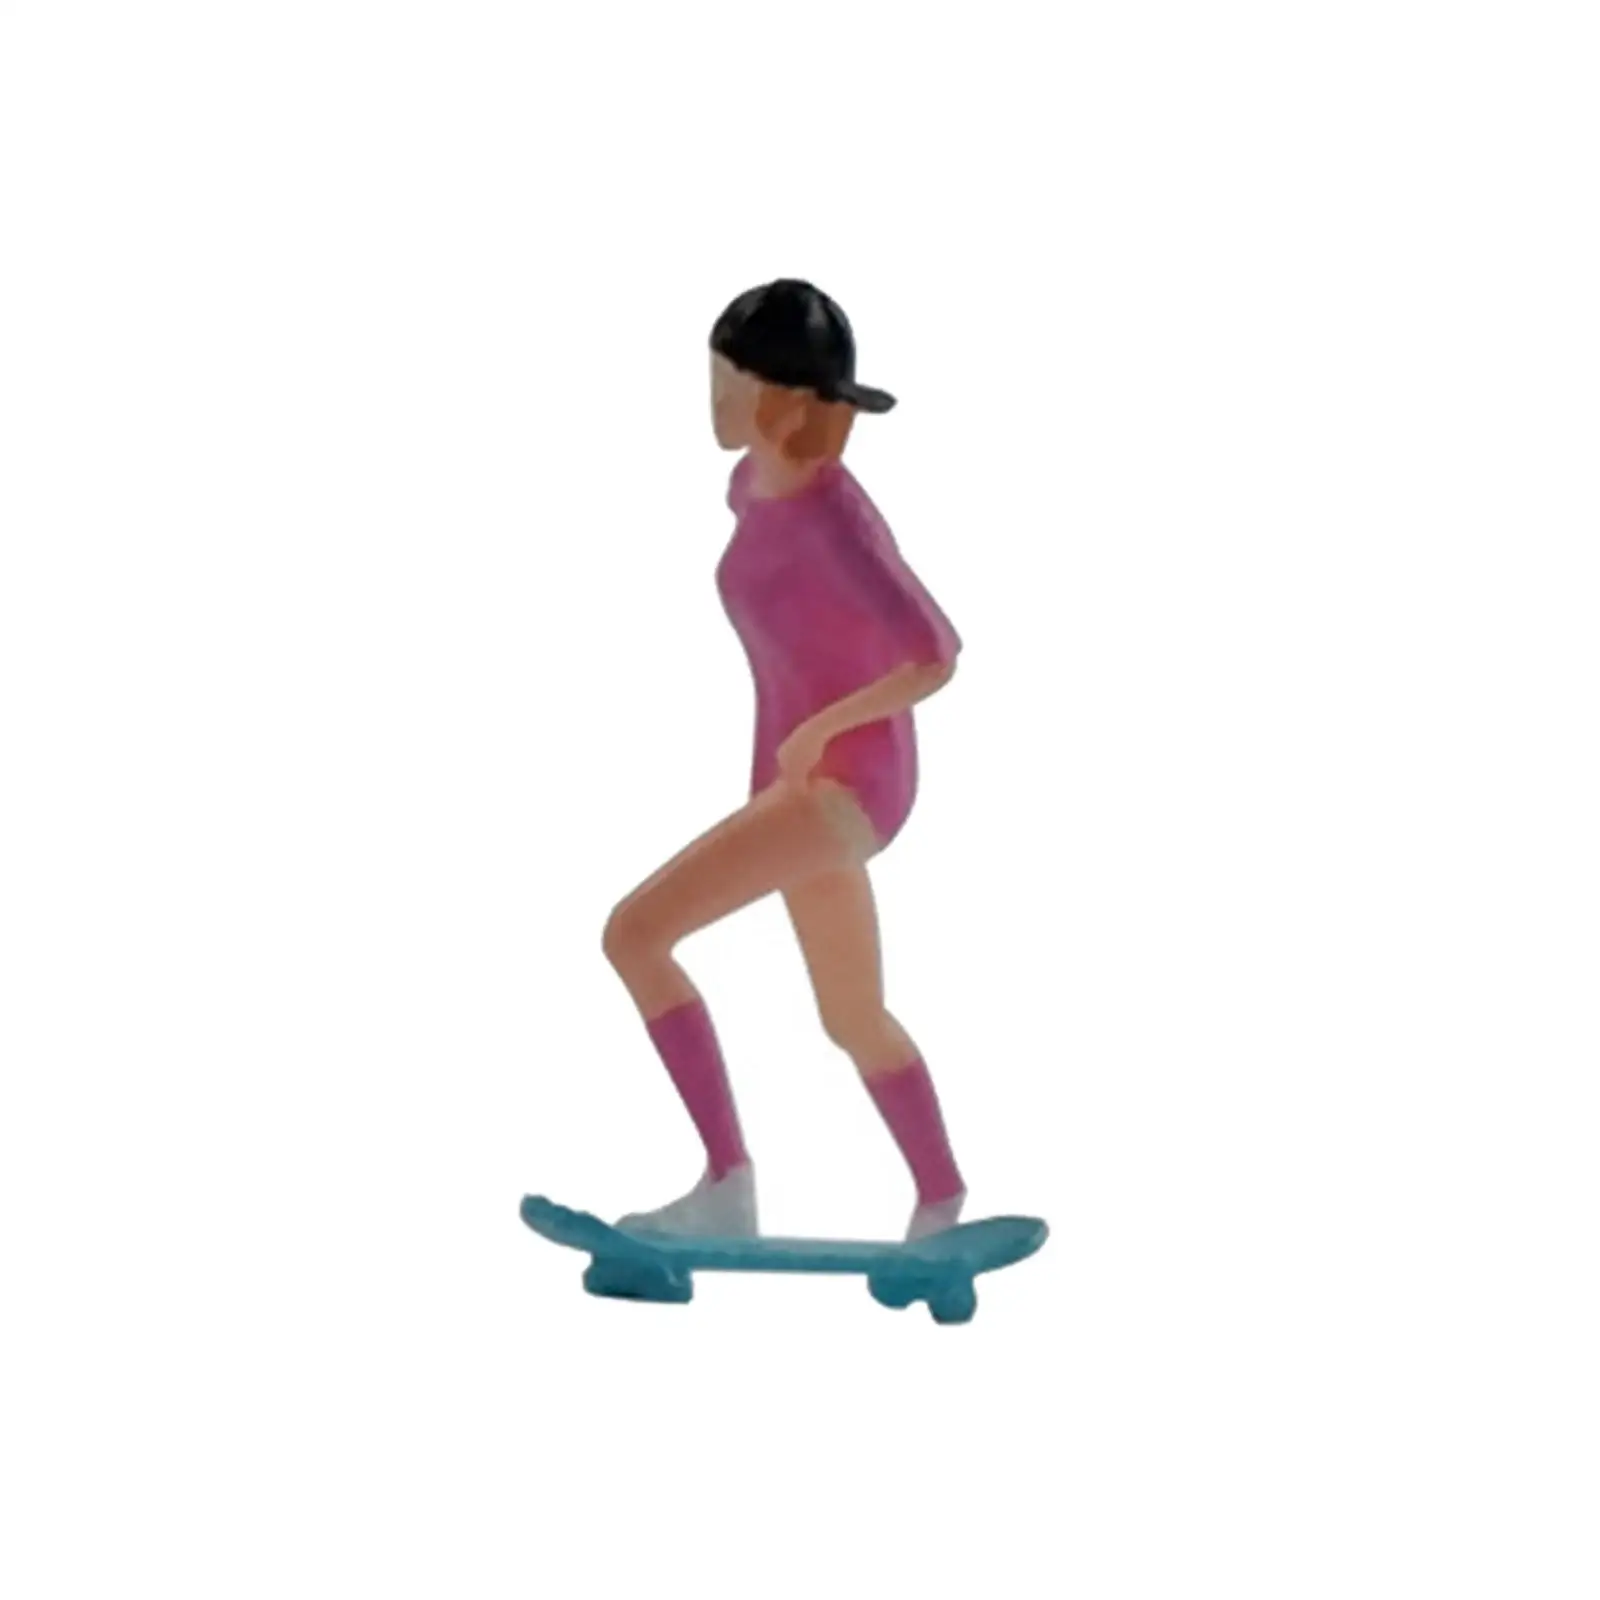 1/64 Diorama Figures Model Skateboard Girl Tiny People for Layout Ornament